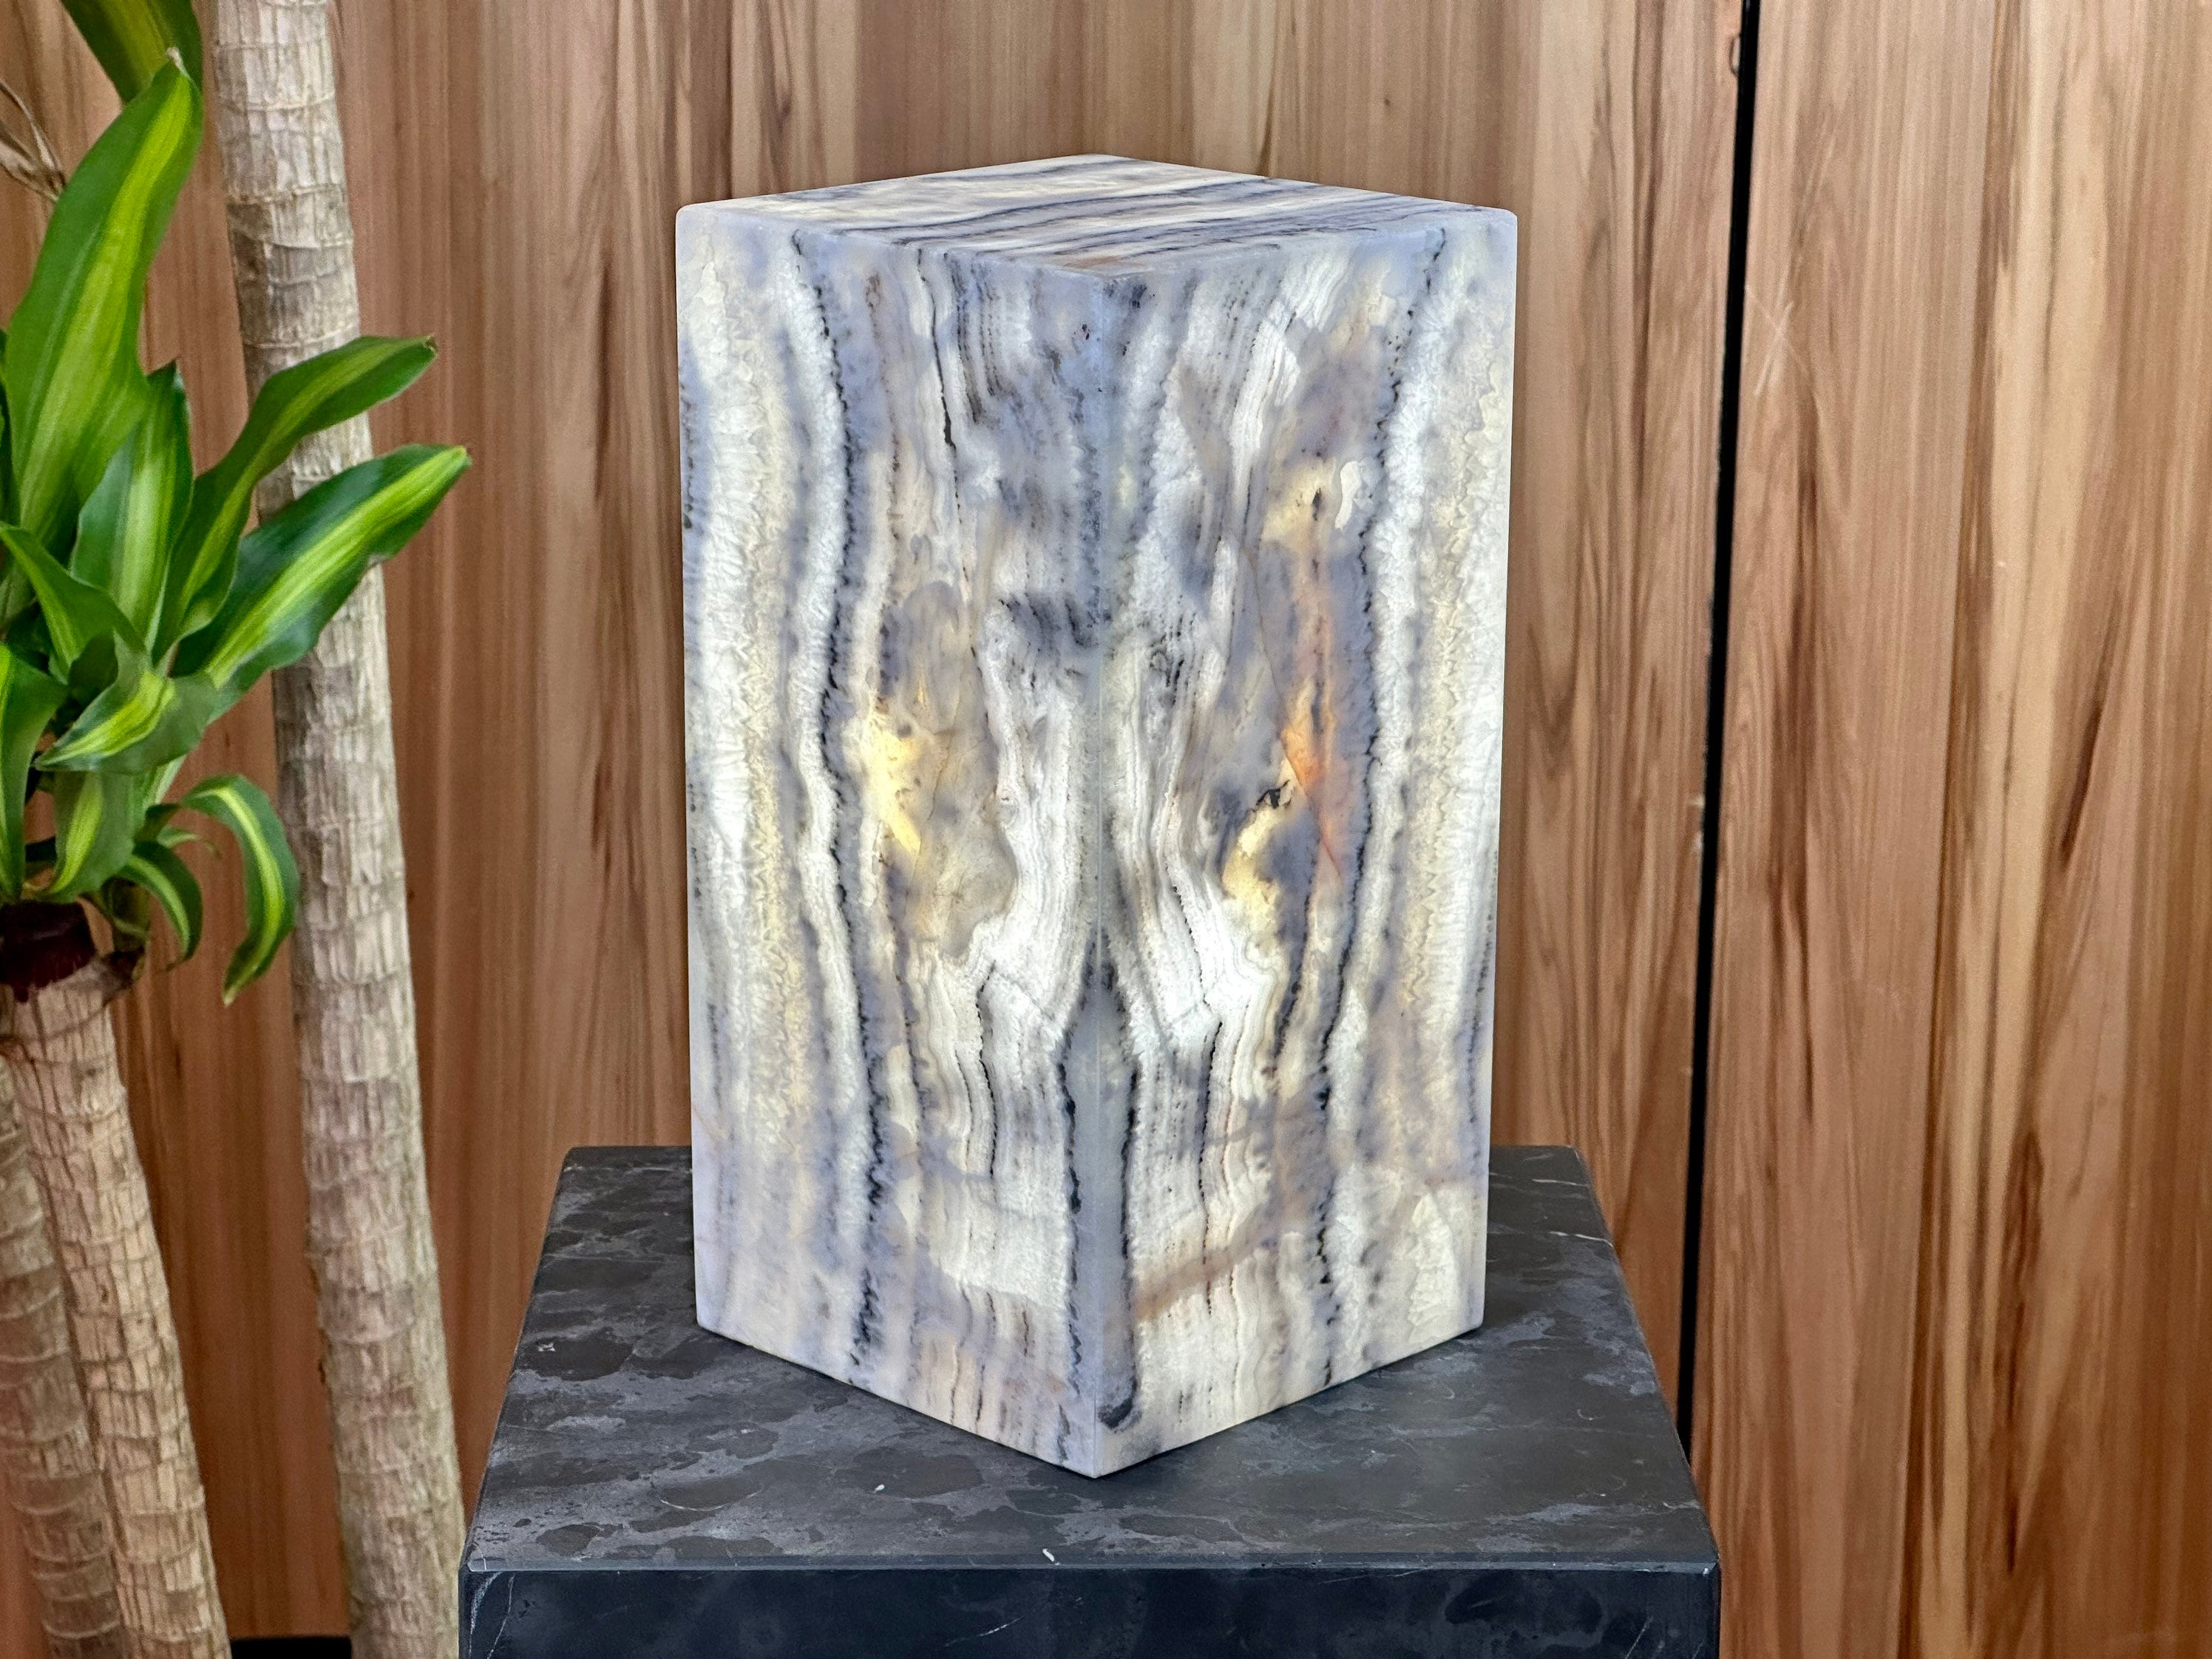 Elegant Onyx Desk Lamp - Modern and Chic Handcrafted Table Lamp for Office, Study, or Nightstand, Perfect Gift for Any Occasion